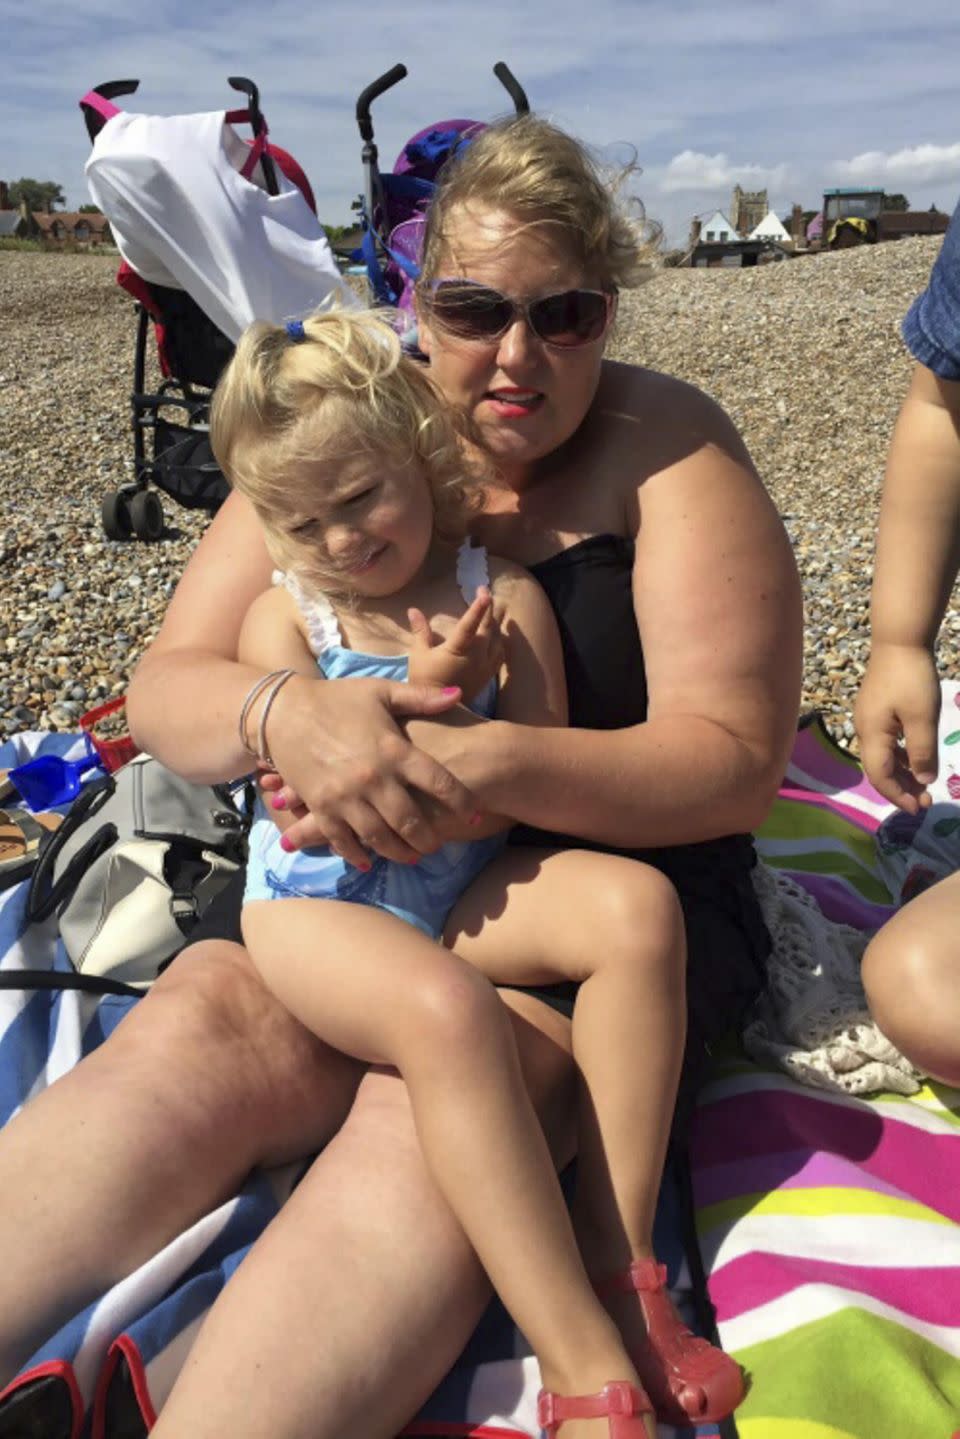 Gemma was accidentally fat-shamed by her daughter - and it sparked an incredible body transformation. Photo: Caters